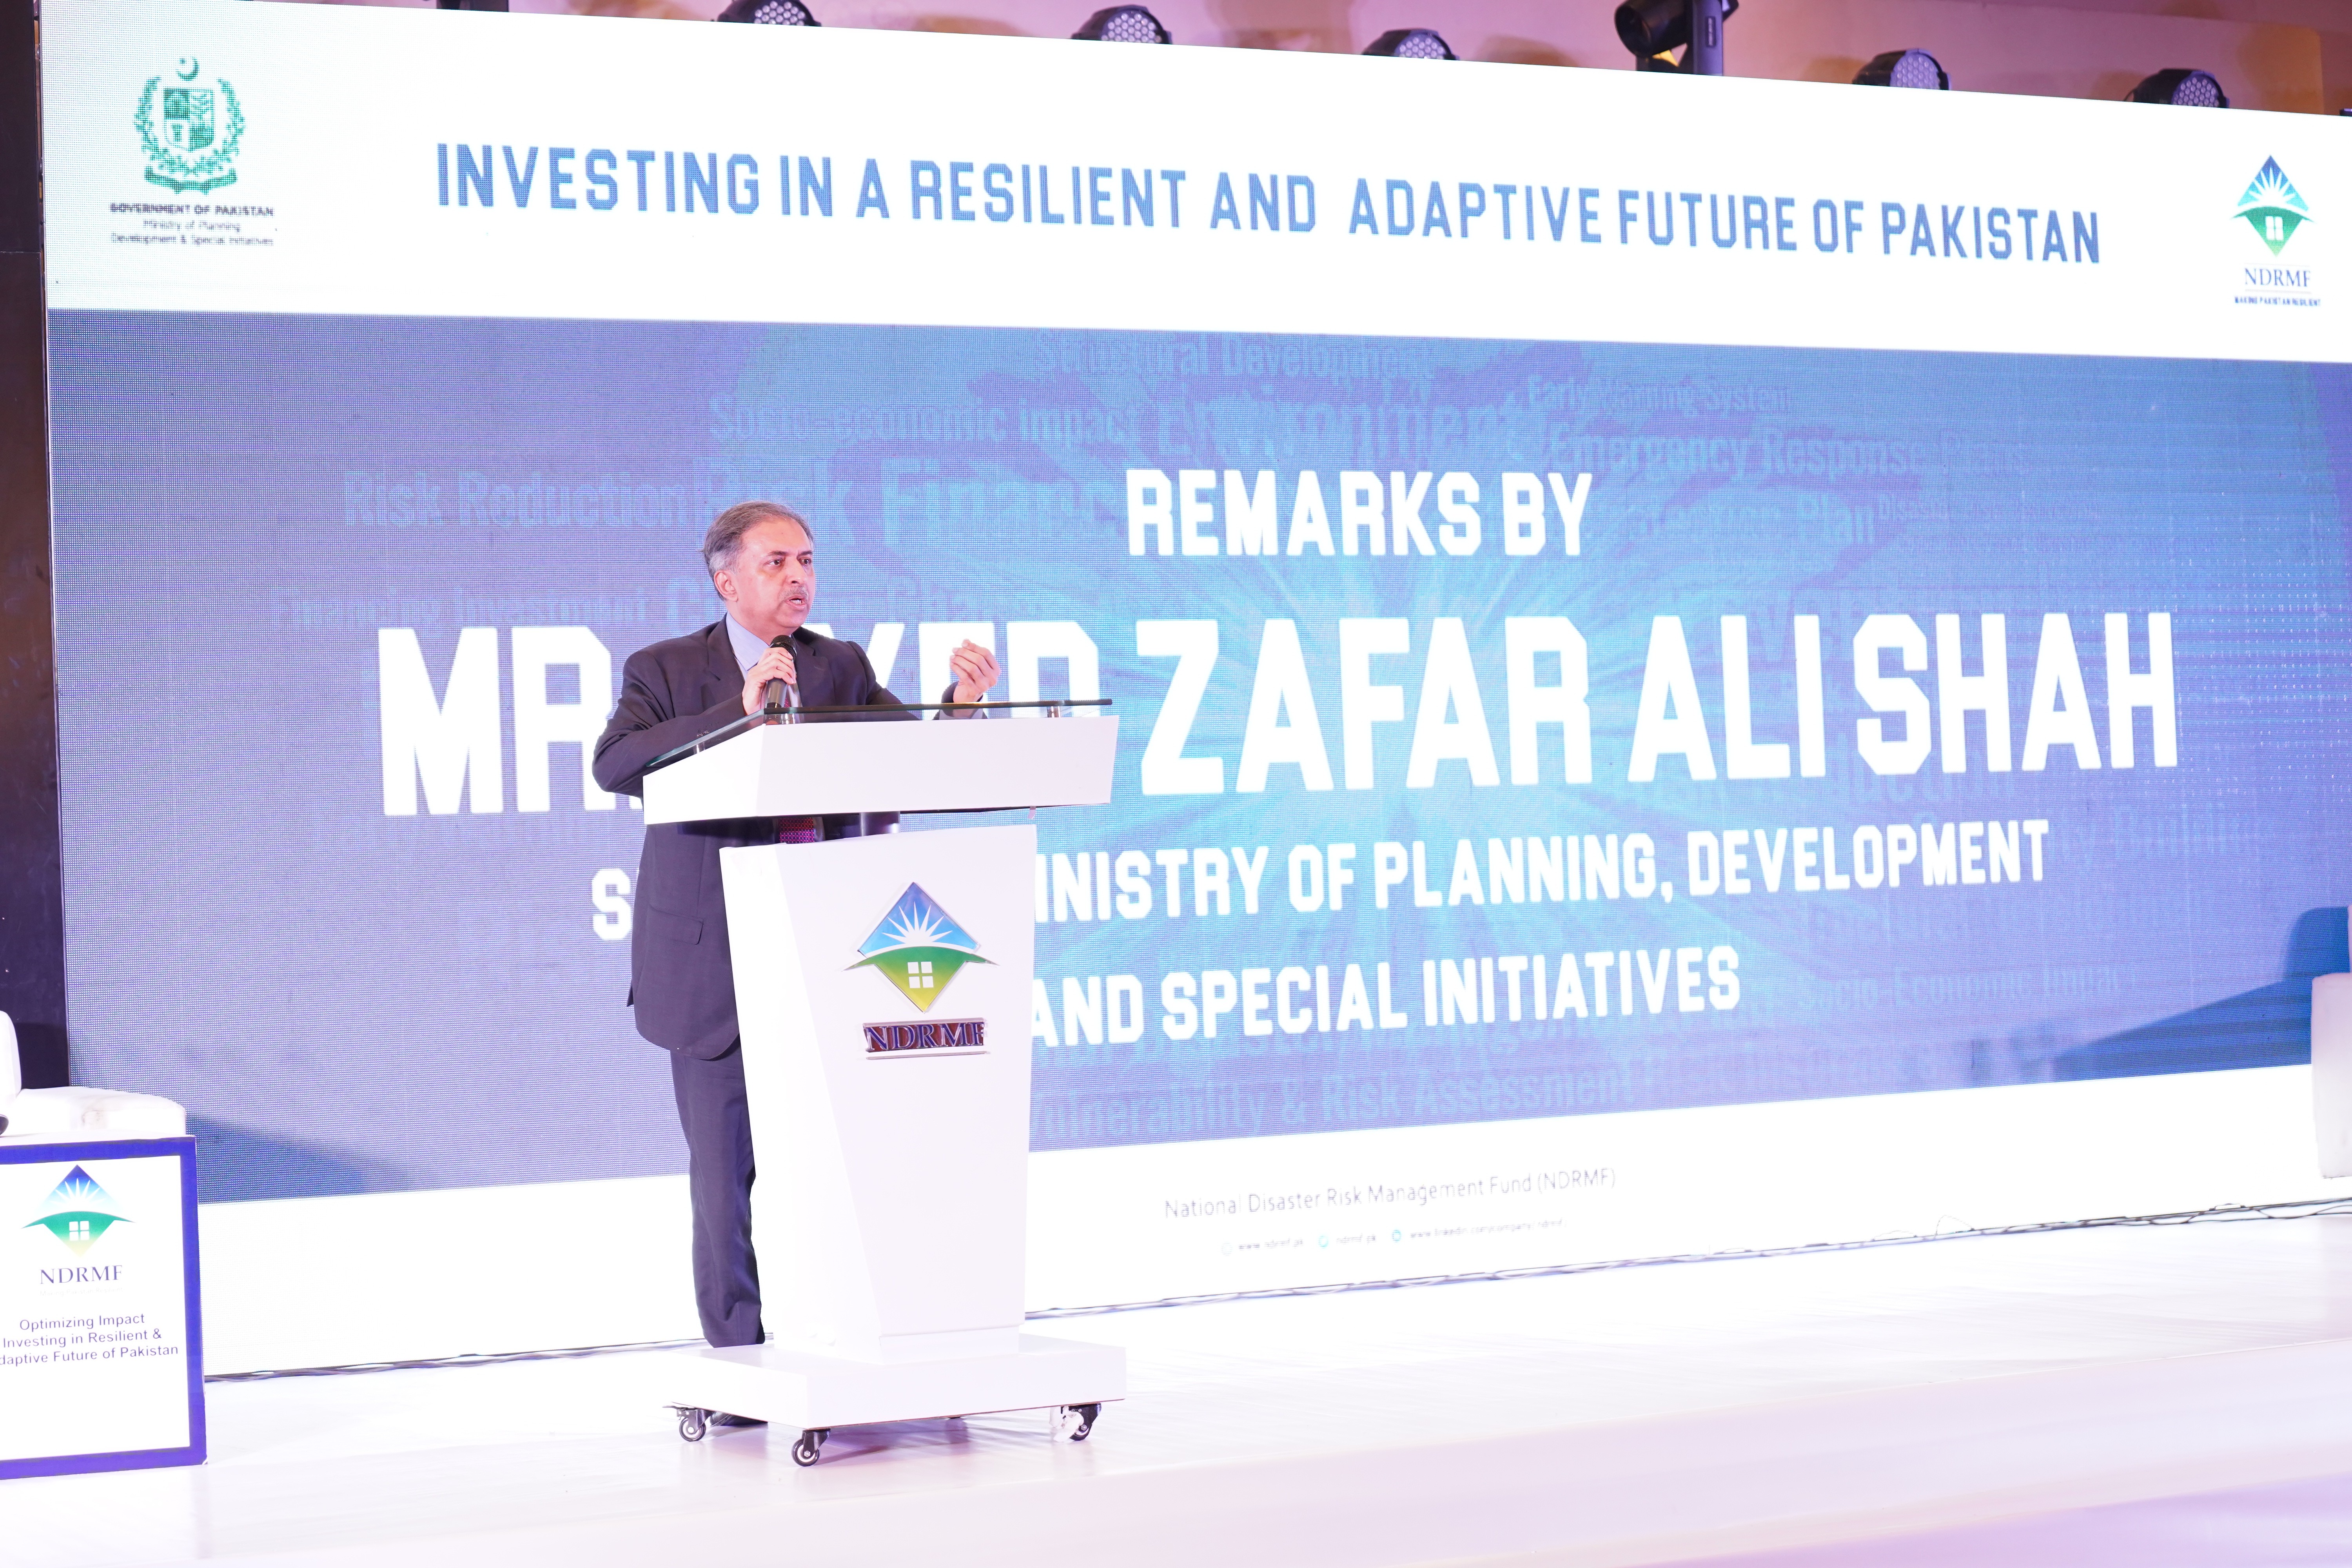 Syed Zafar Ali Shah : Secretary Ministry of planning development and special initiatives  adressing to the conference held on investing in a resilient and adaptive future of Pakistan organize